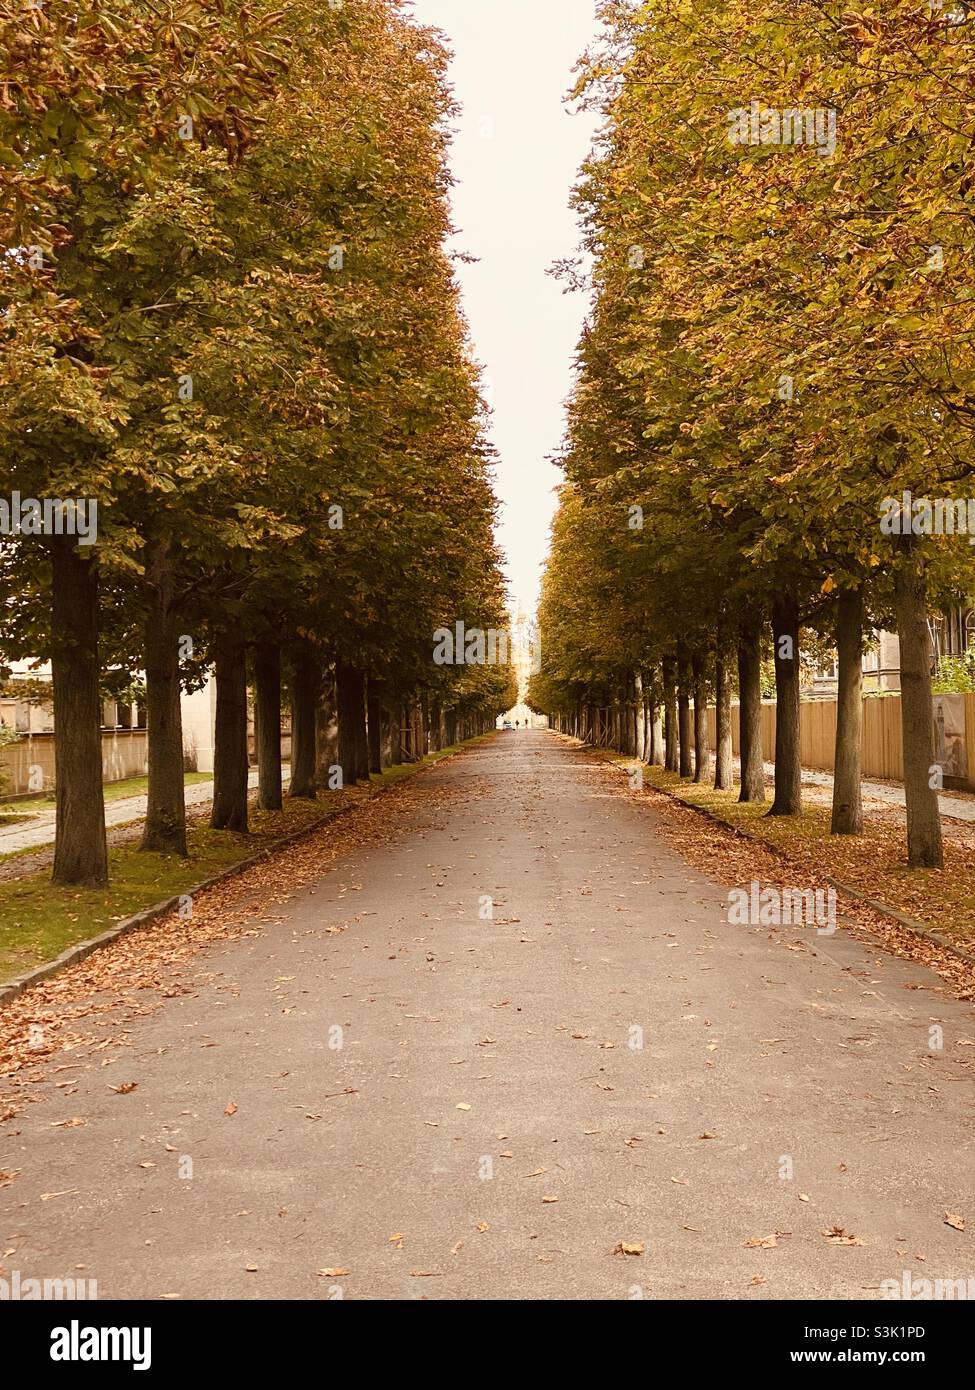 Empty tree lined street in autumn with changing leaves Stock Photo